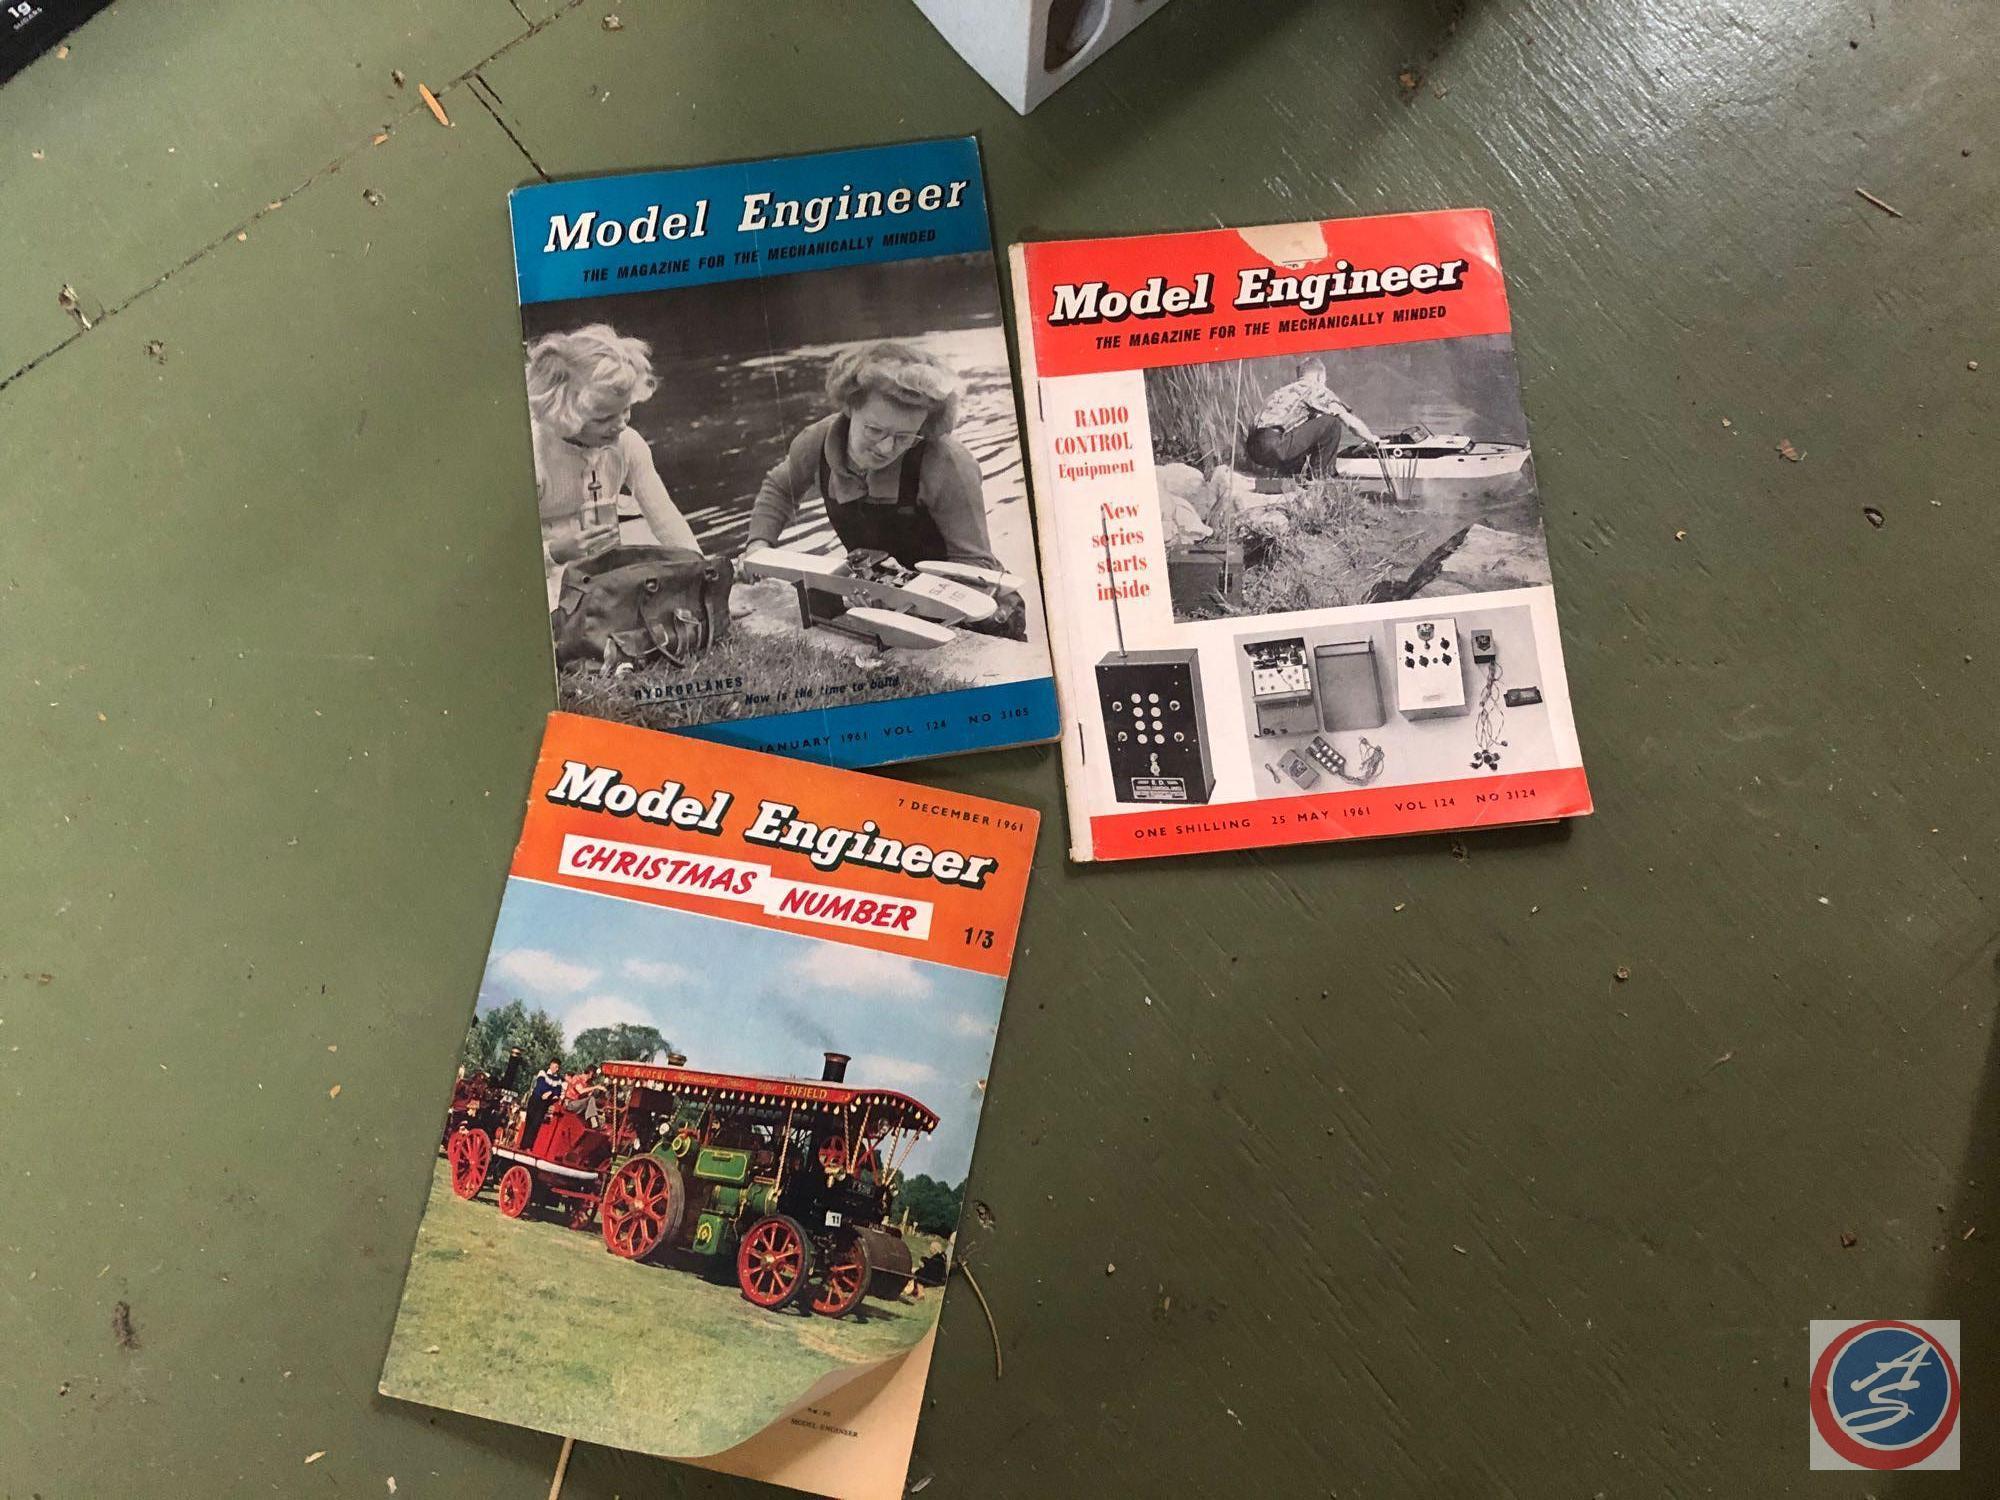 Magazine Racks and Magazines Including Titles Such As Design Handbook of Model Railroads, Classic